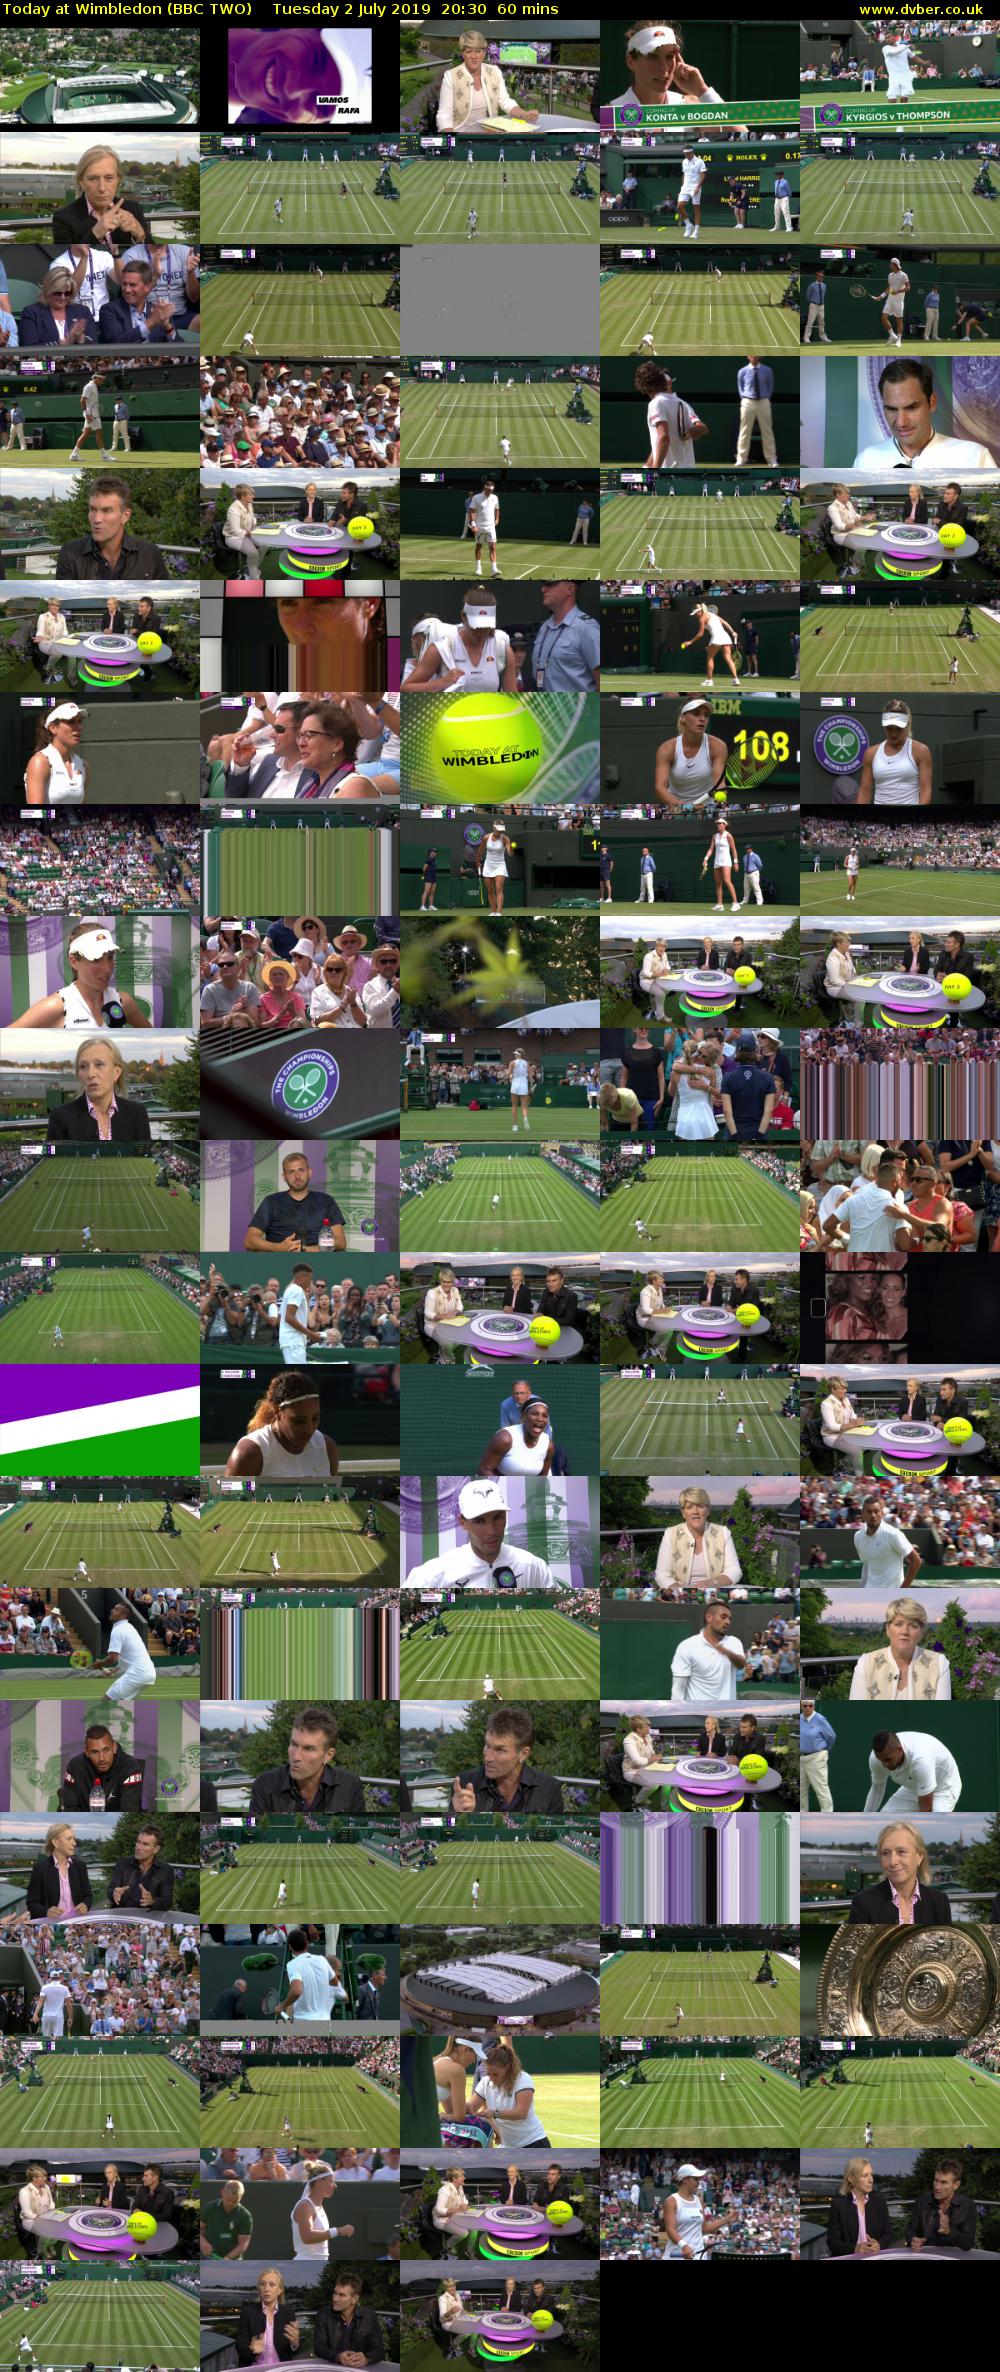 Today at Wimbledon (BBC TWO) Tuesday 2 July 2019 20:30 - 21:30